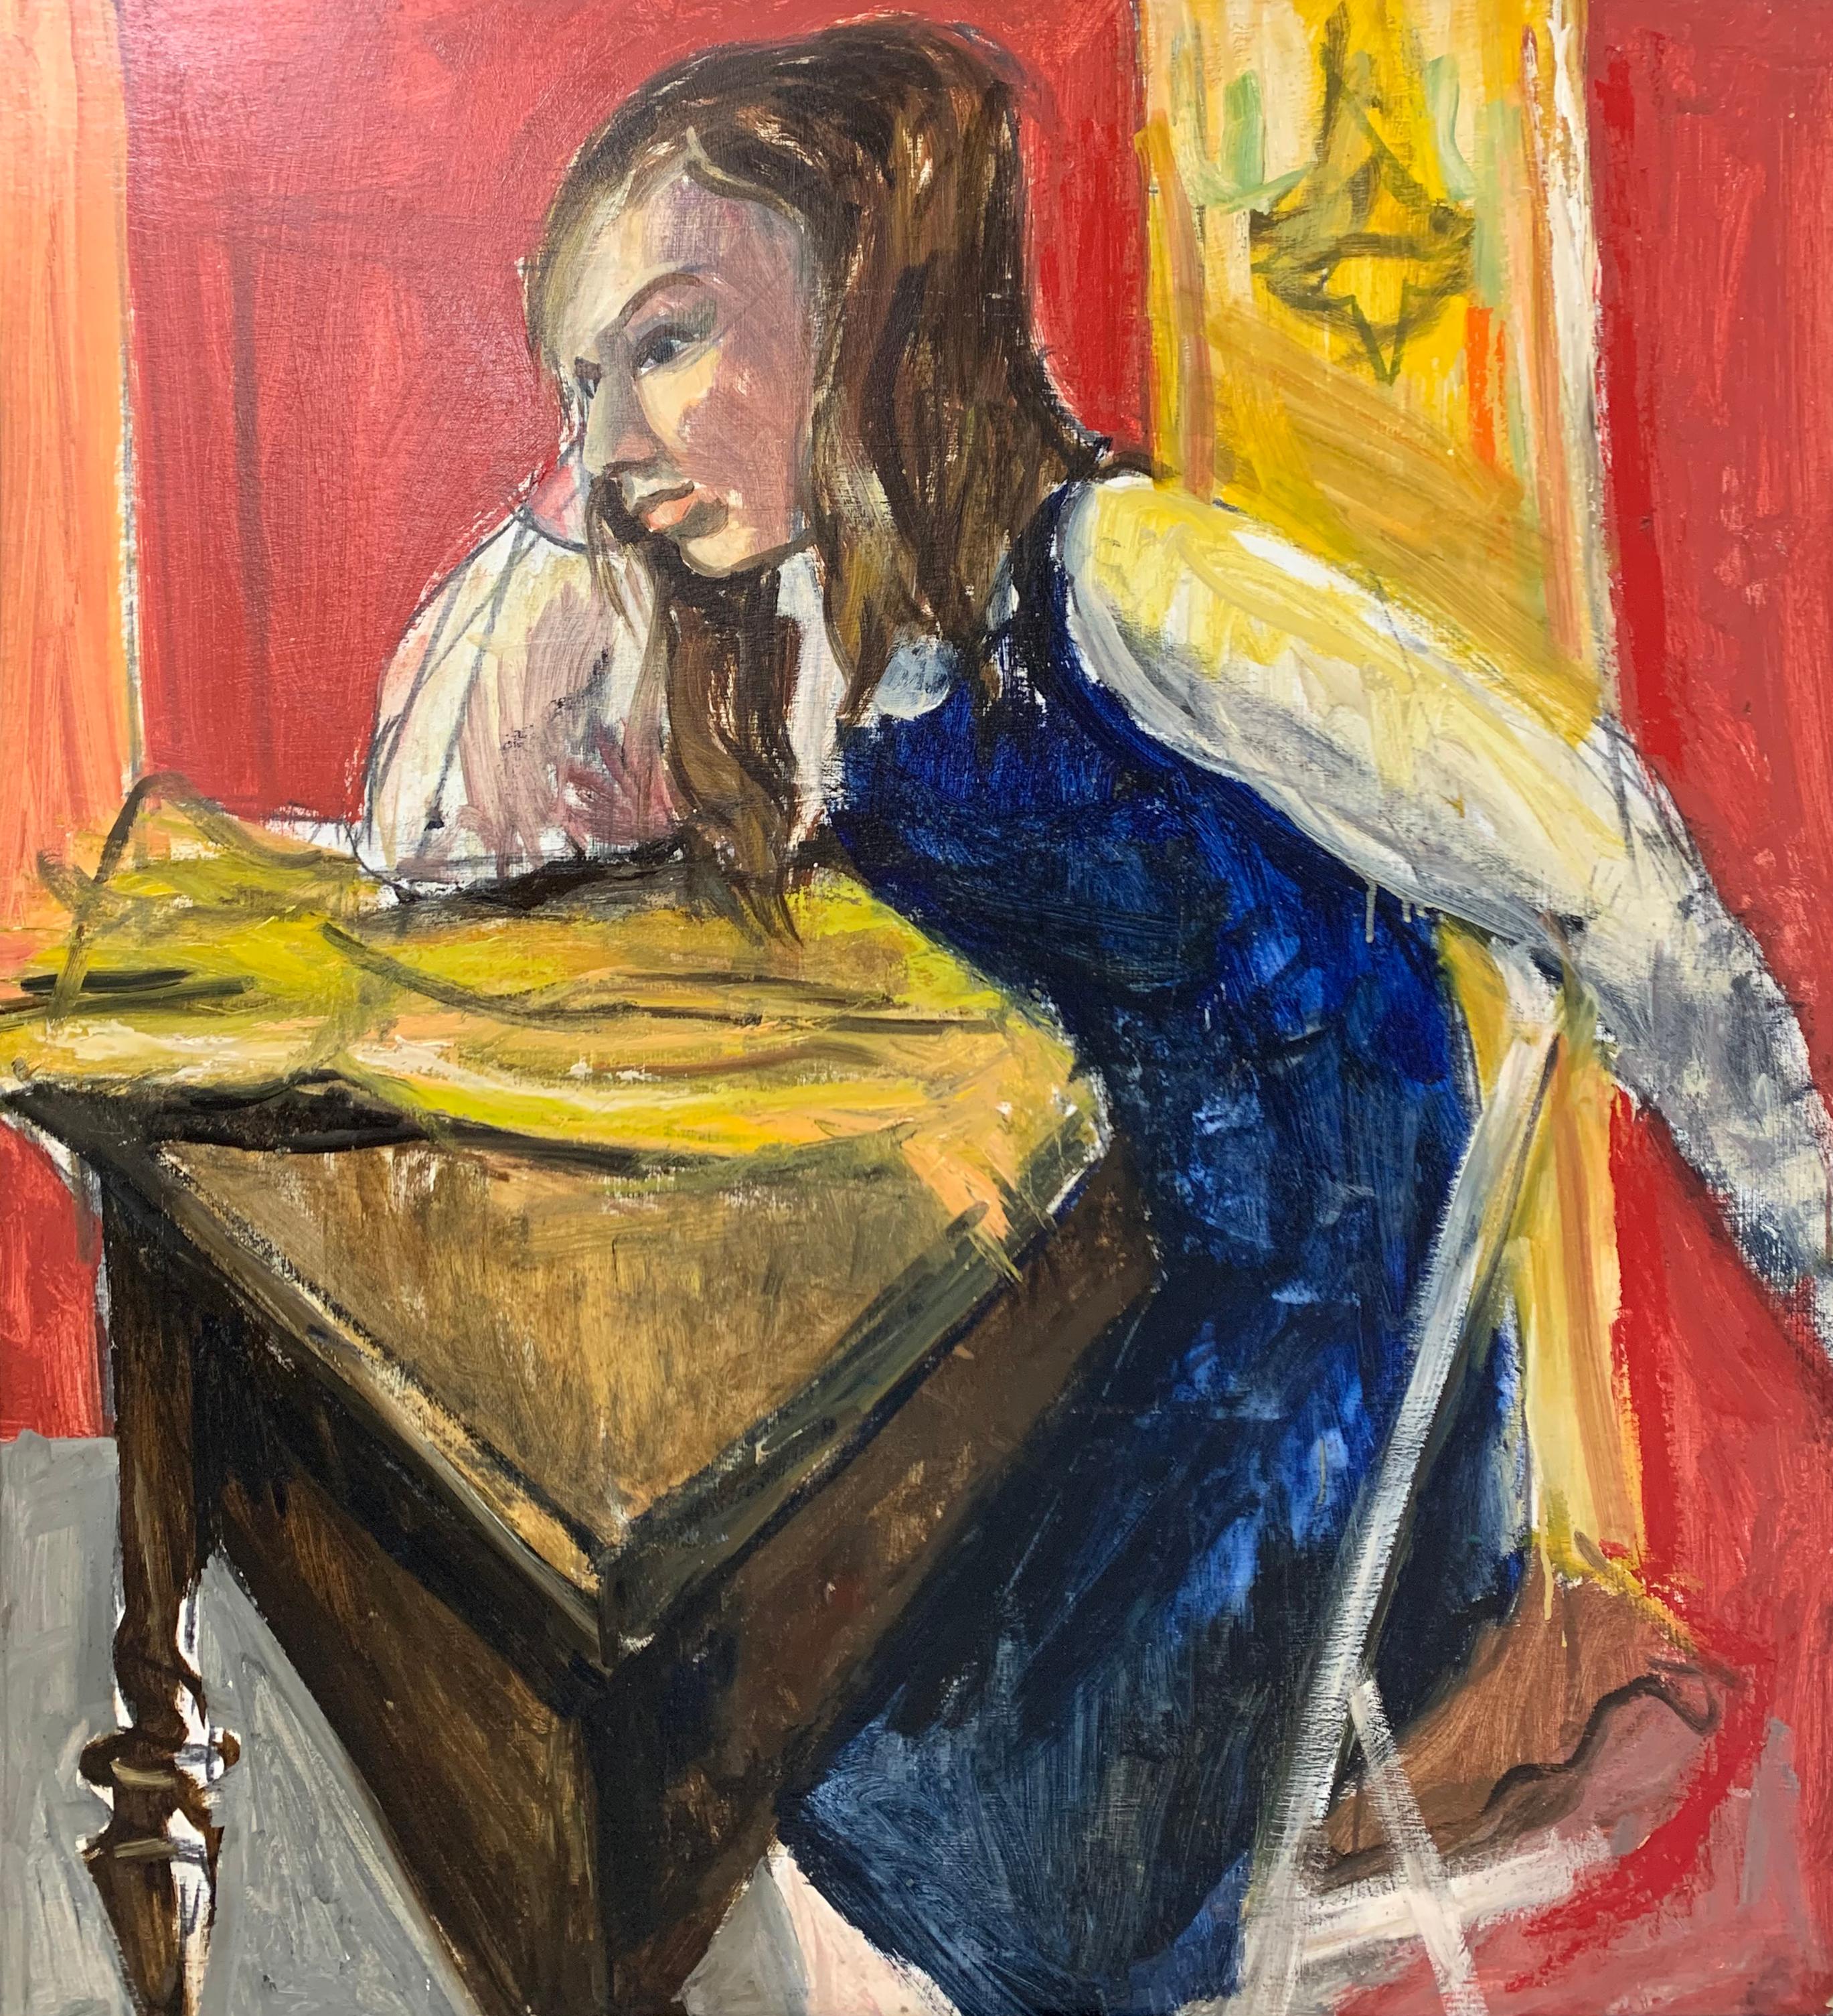 Girl at Desk, Expressionist Portrait of Young Woman by Philadelphia Artist - Painting by Bernard Harmon